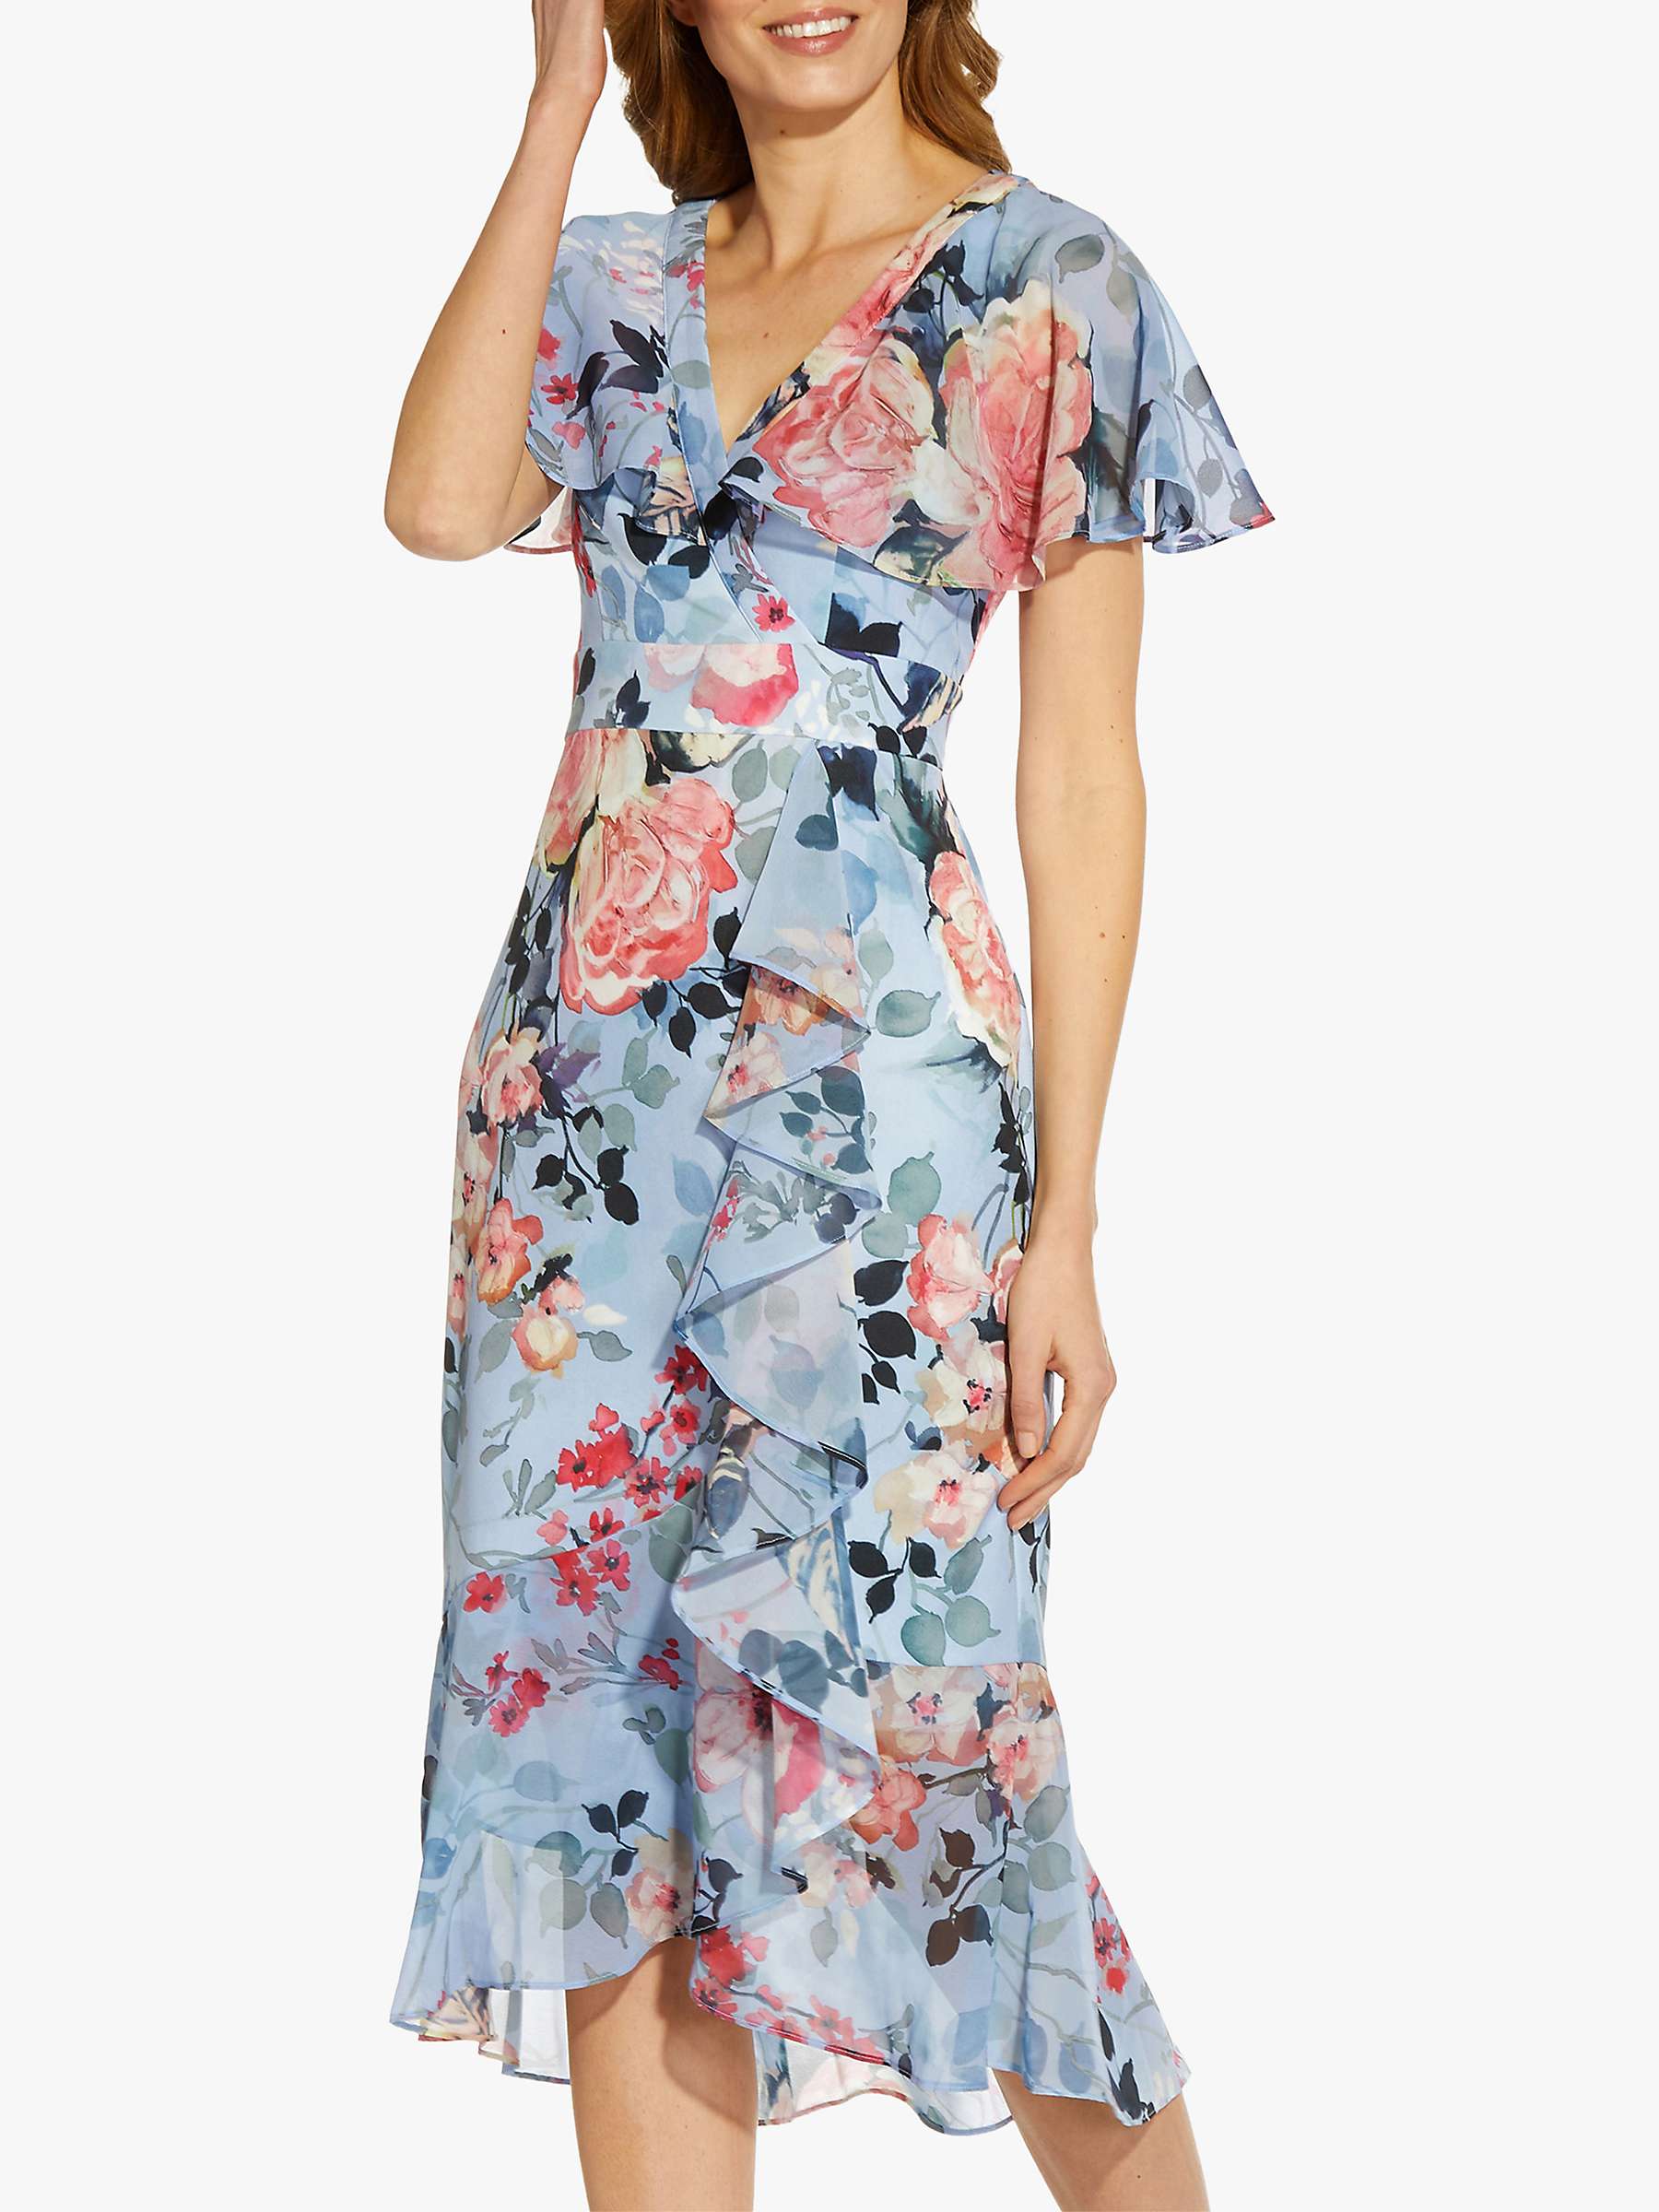 Buy Adrianna Papell Floral Print Ruffle Midi Dress, Blue/Multi Online at johnlewis.com